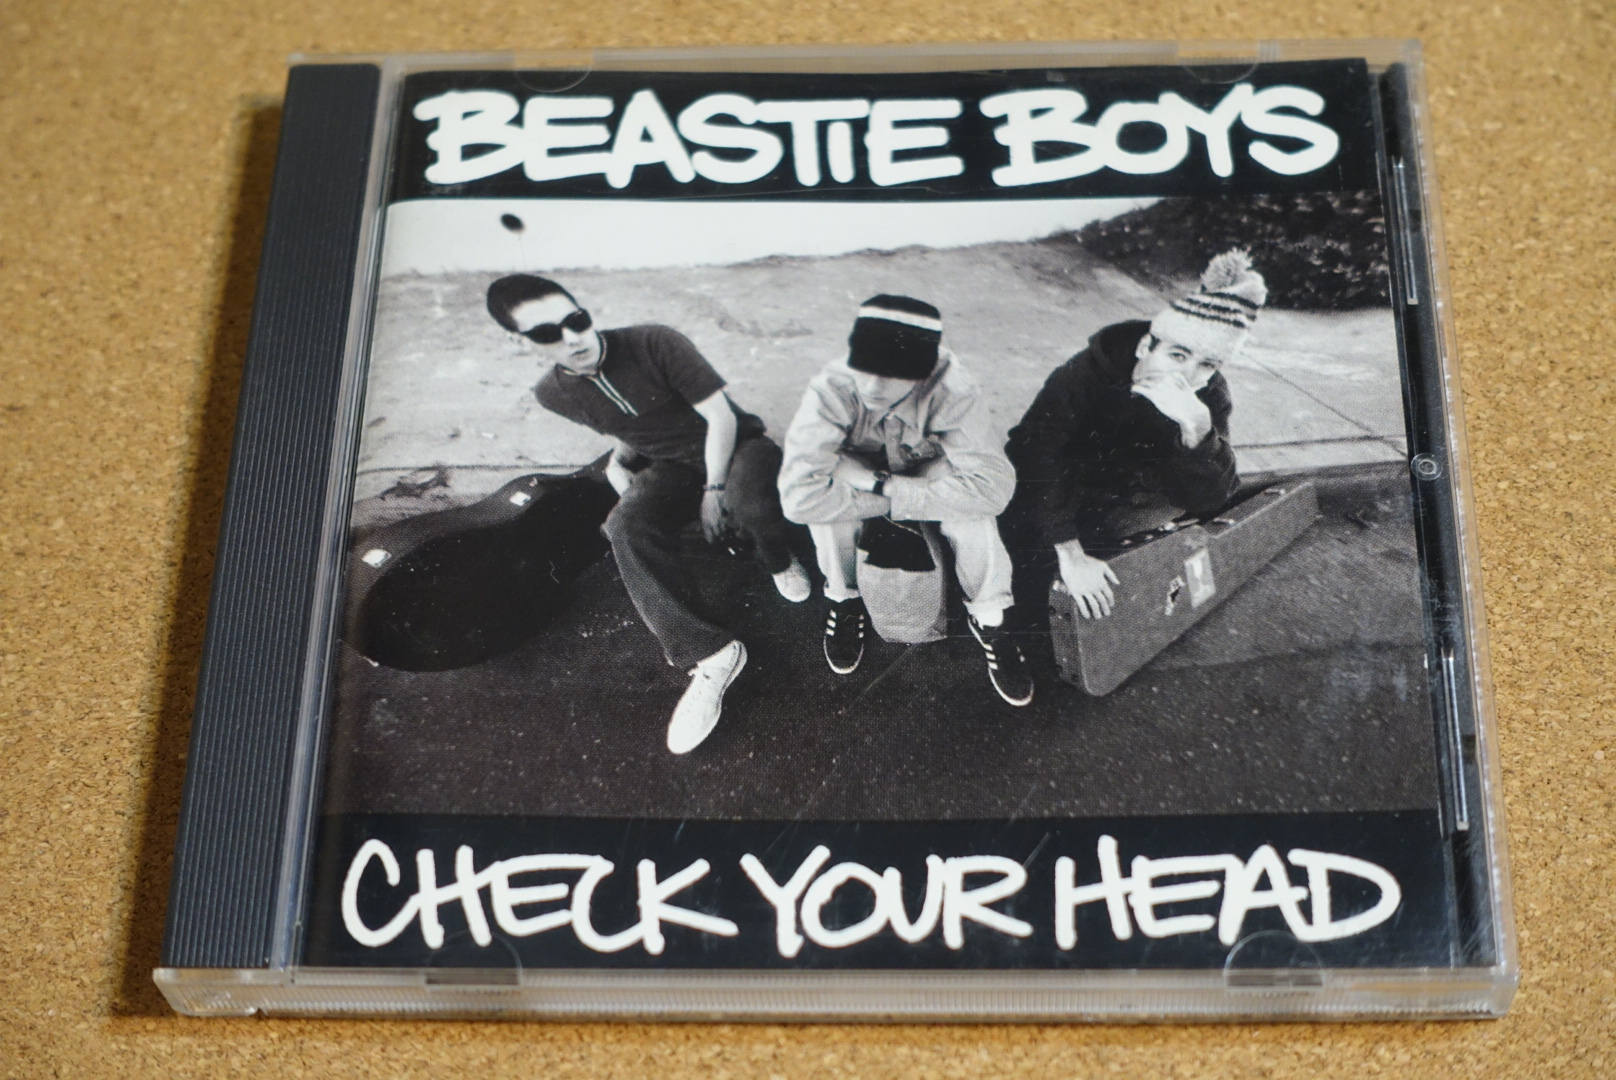 Check Your Head by Beastie Boys Vintage CD Compact Disc